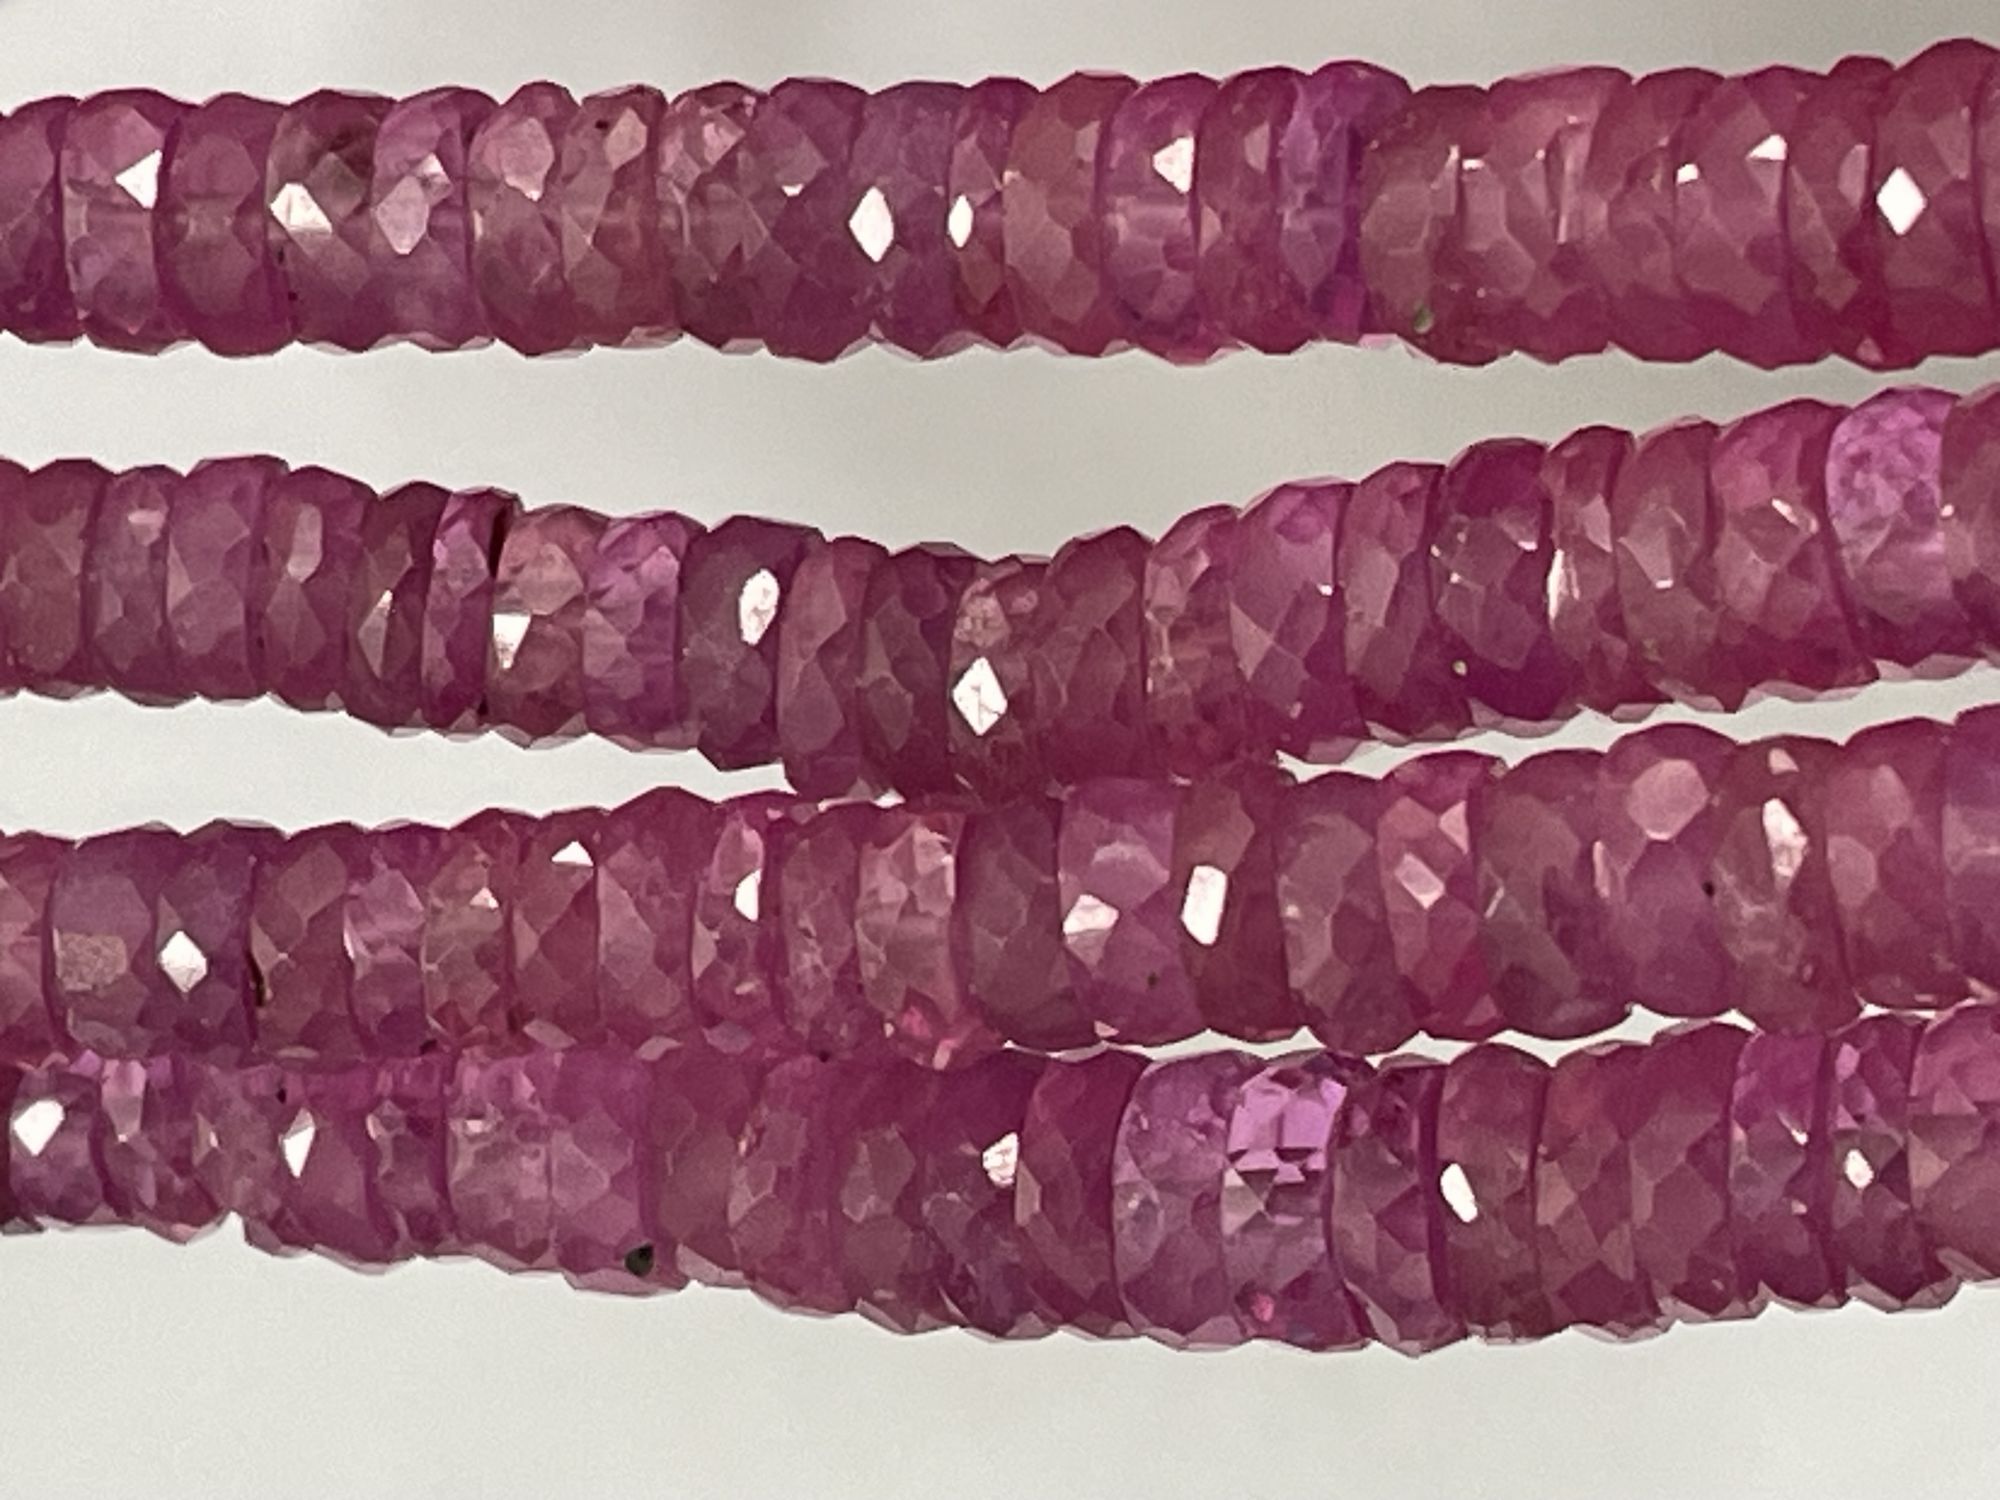 Pink Sapphire Rondelle Faceted